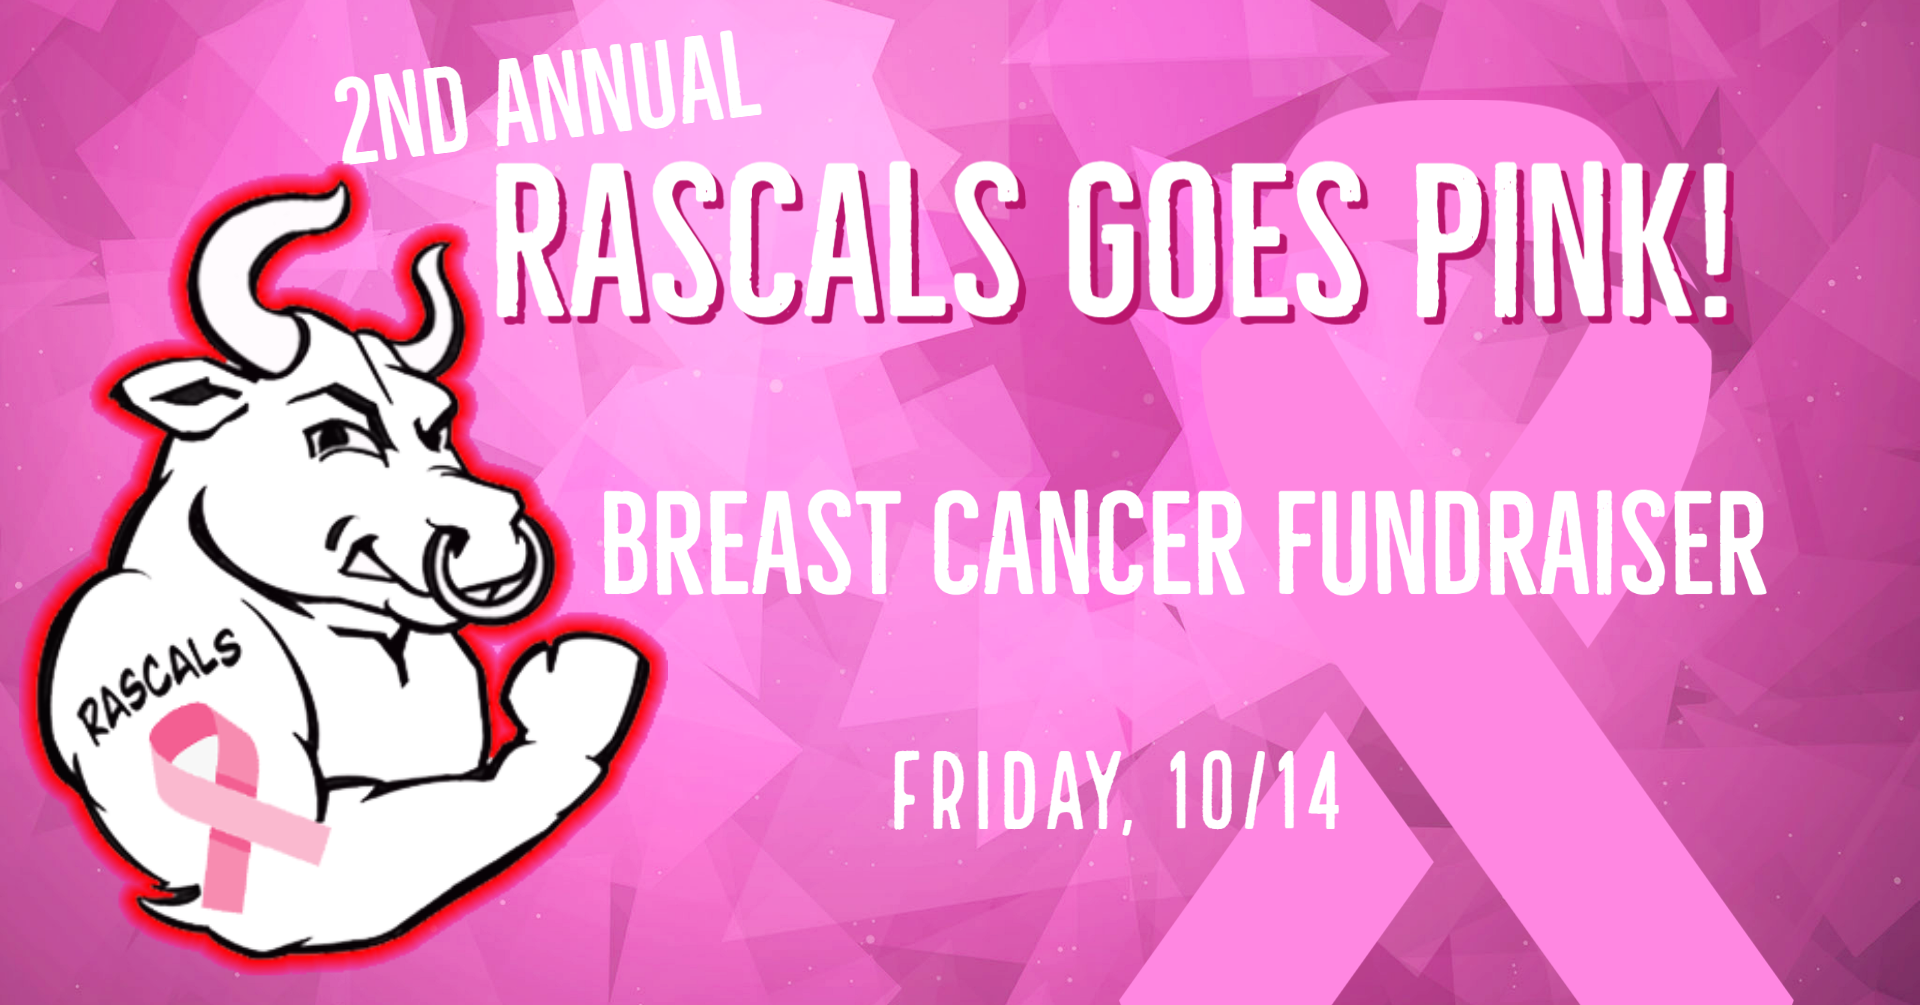 Rascals goes pink breast cancer fundraiser